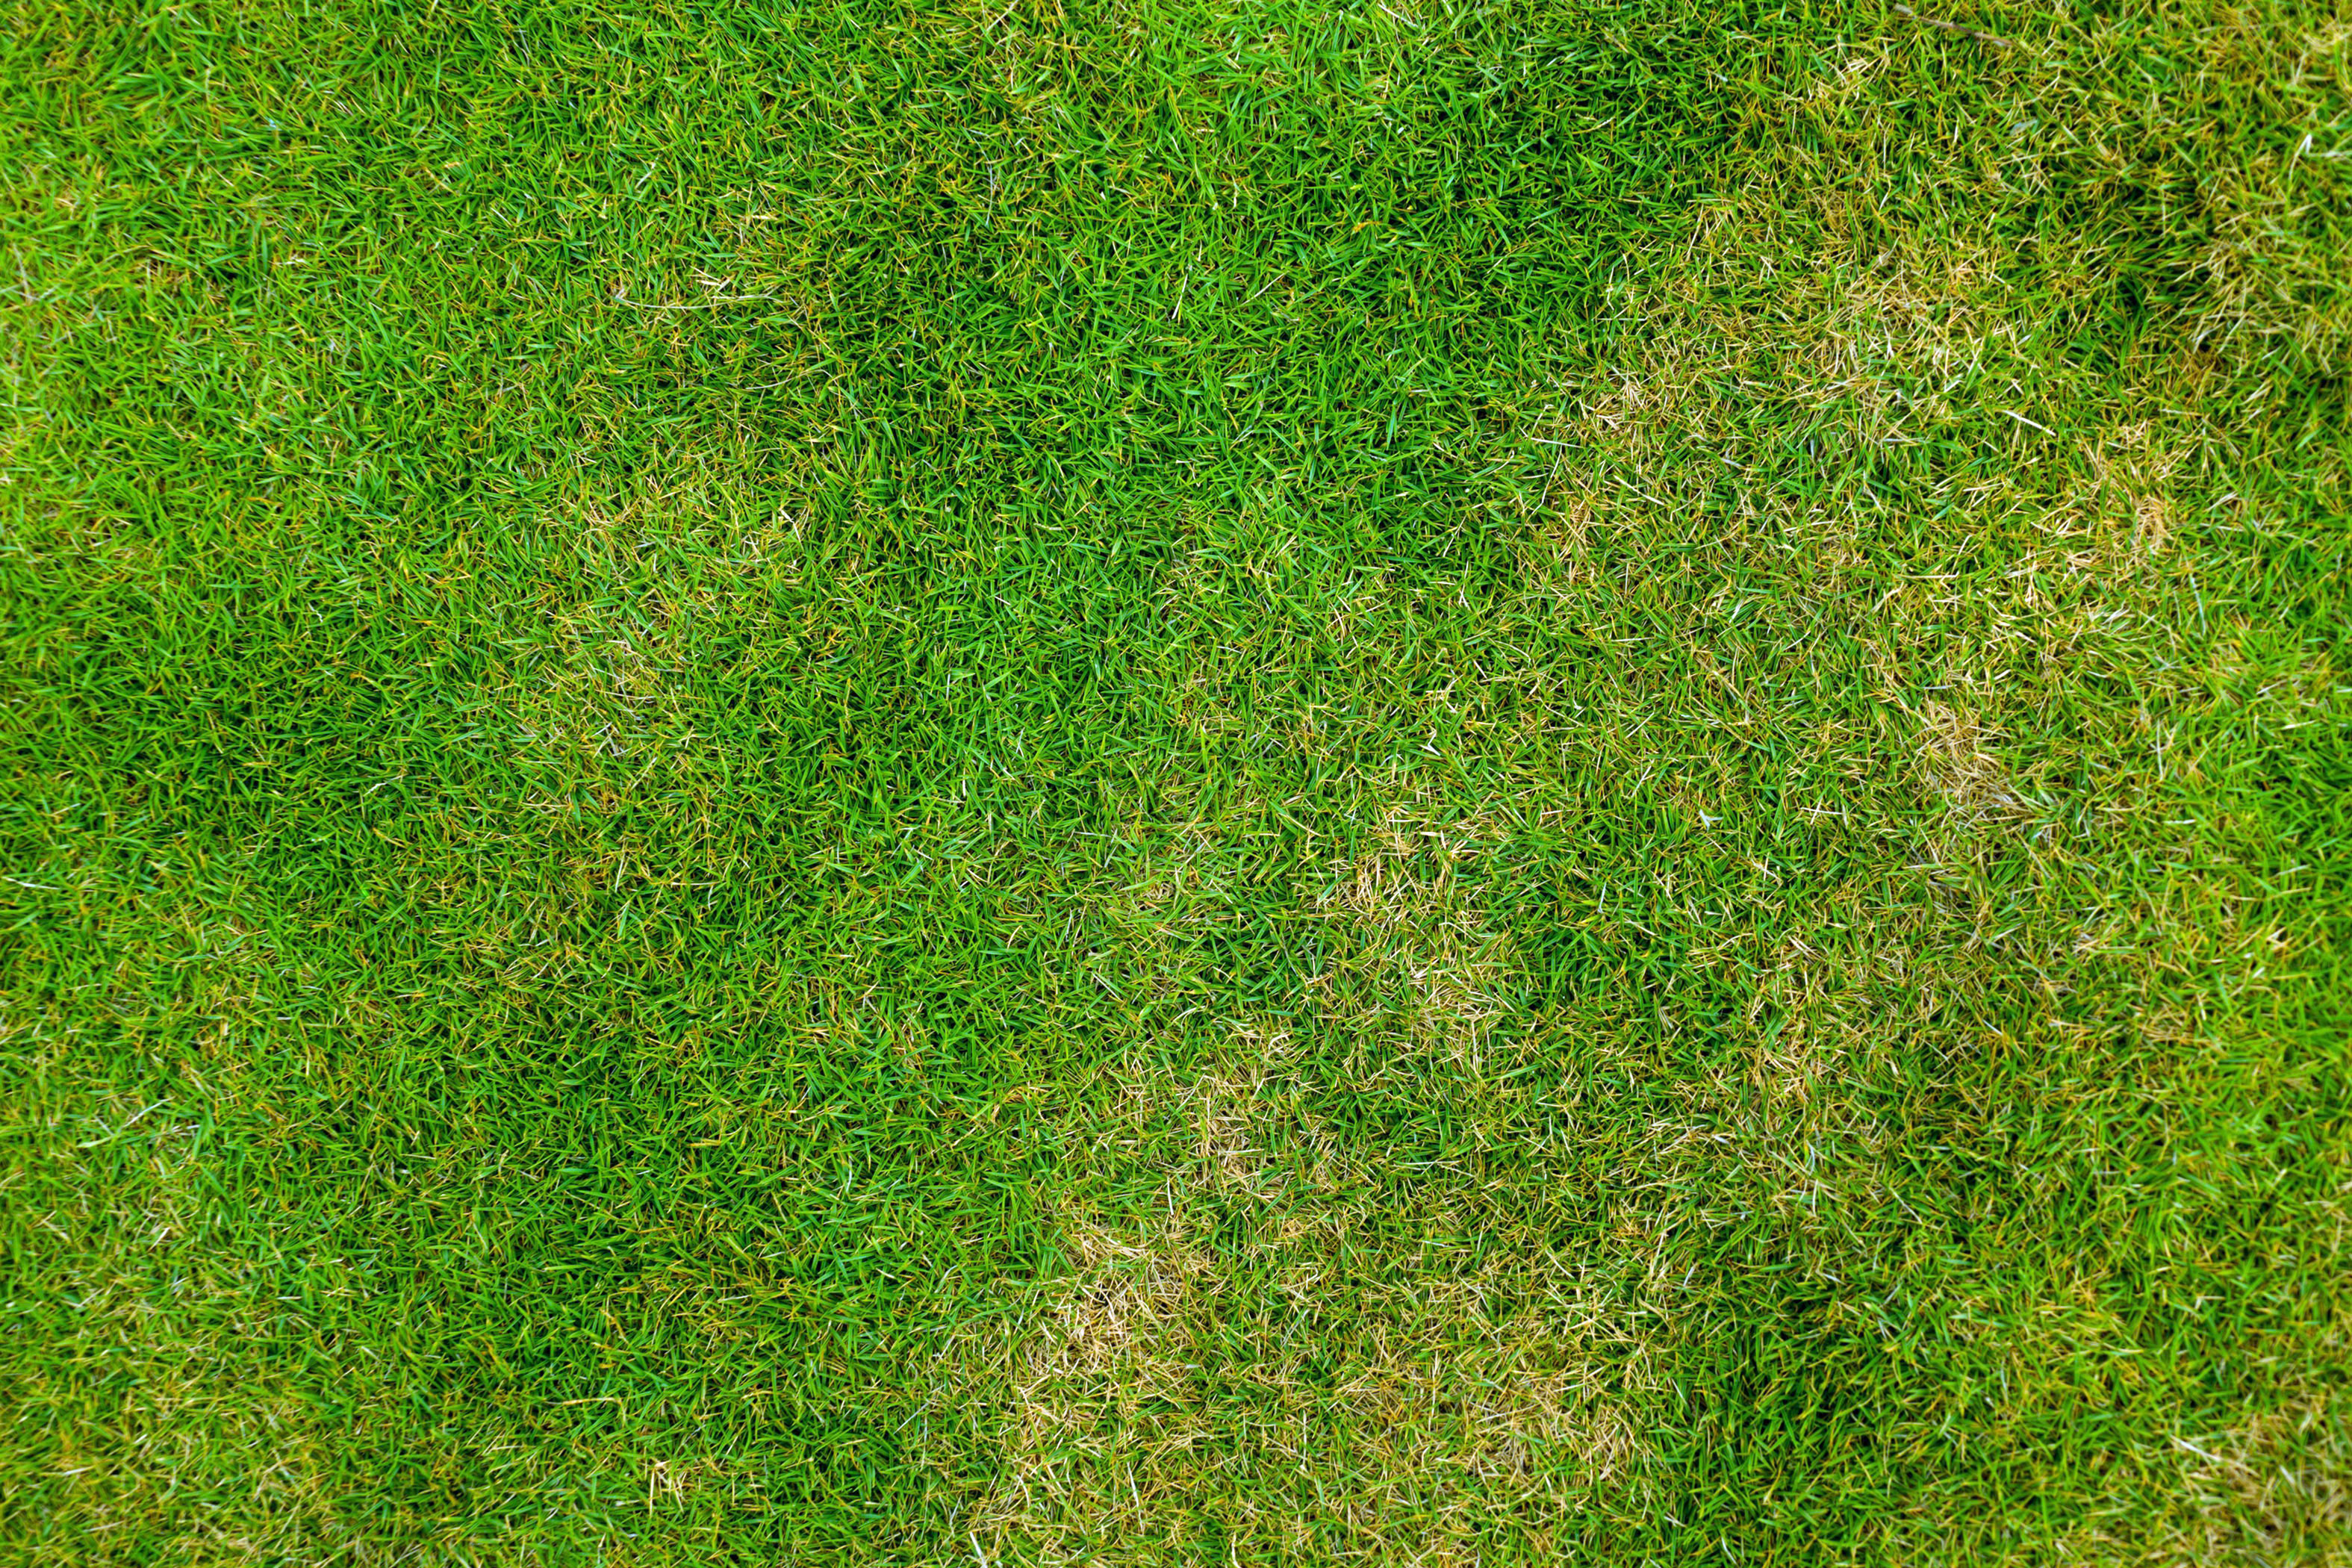 Top Down  Grass Texture Or Green Lawn Photo Image